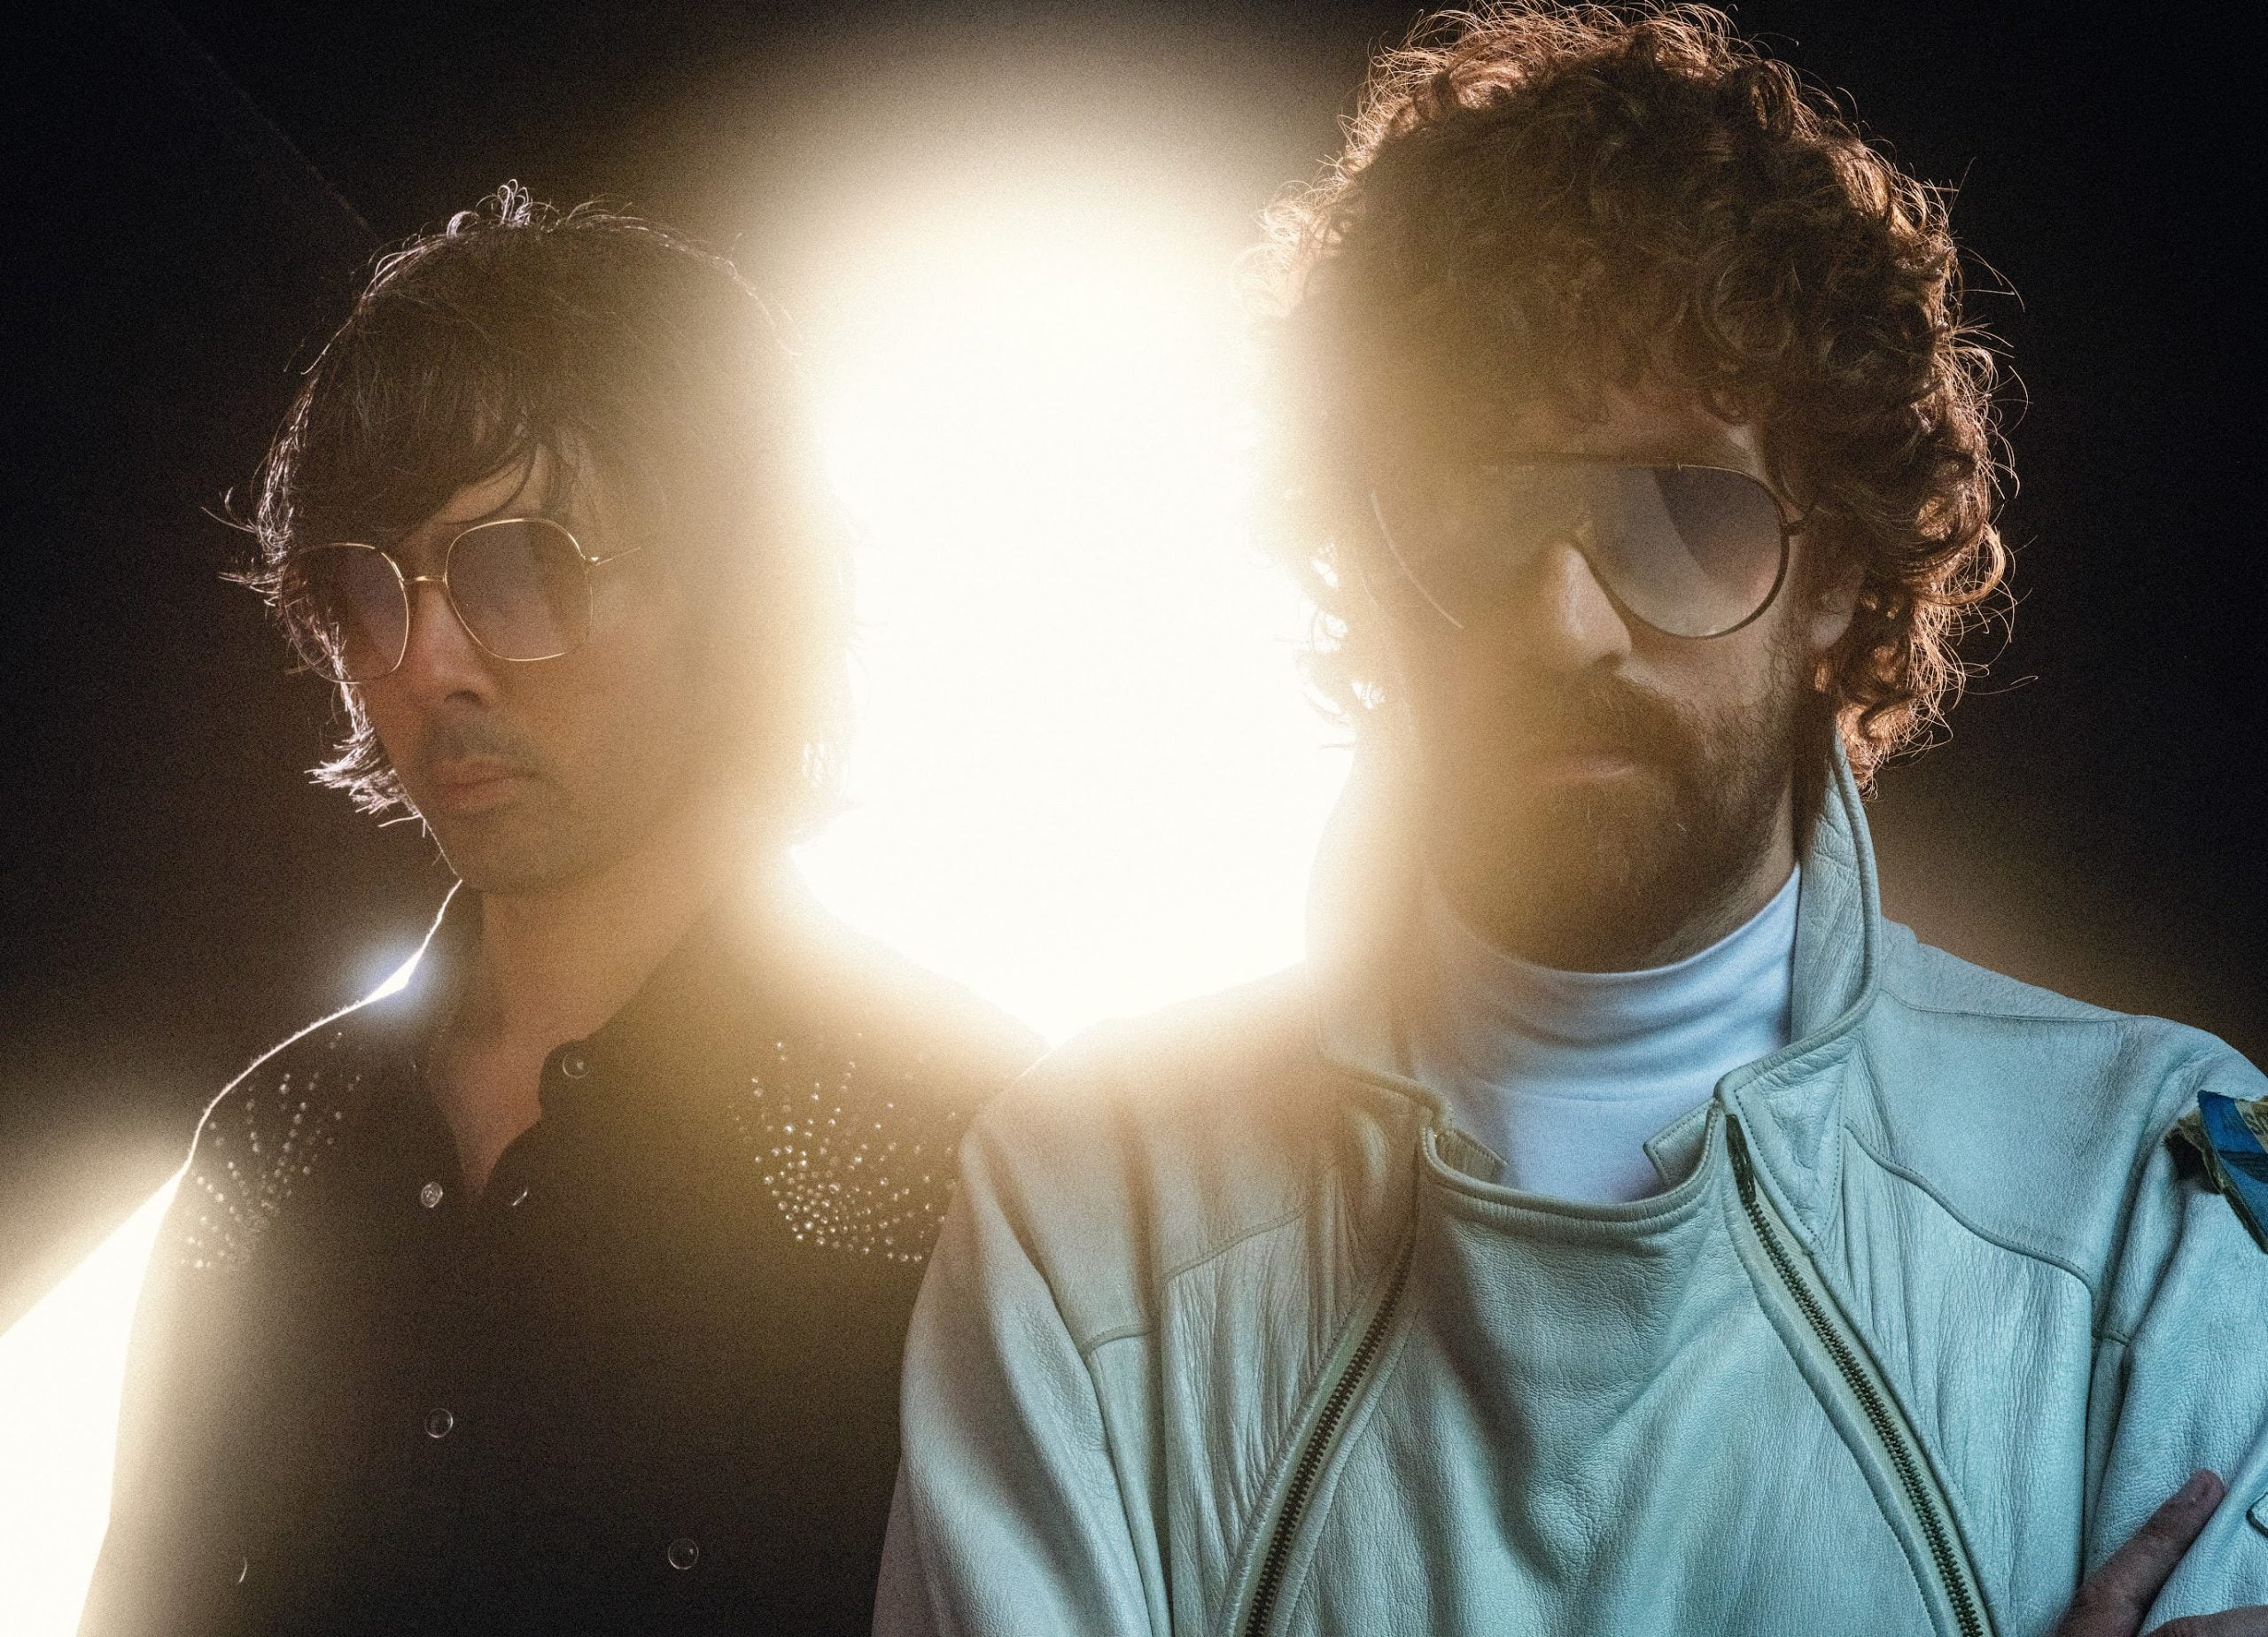 Justice unveils highly anticipated album ‘Hyperdrama’ alongside two new singles